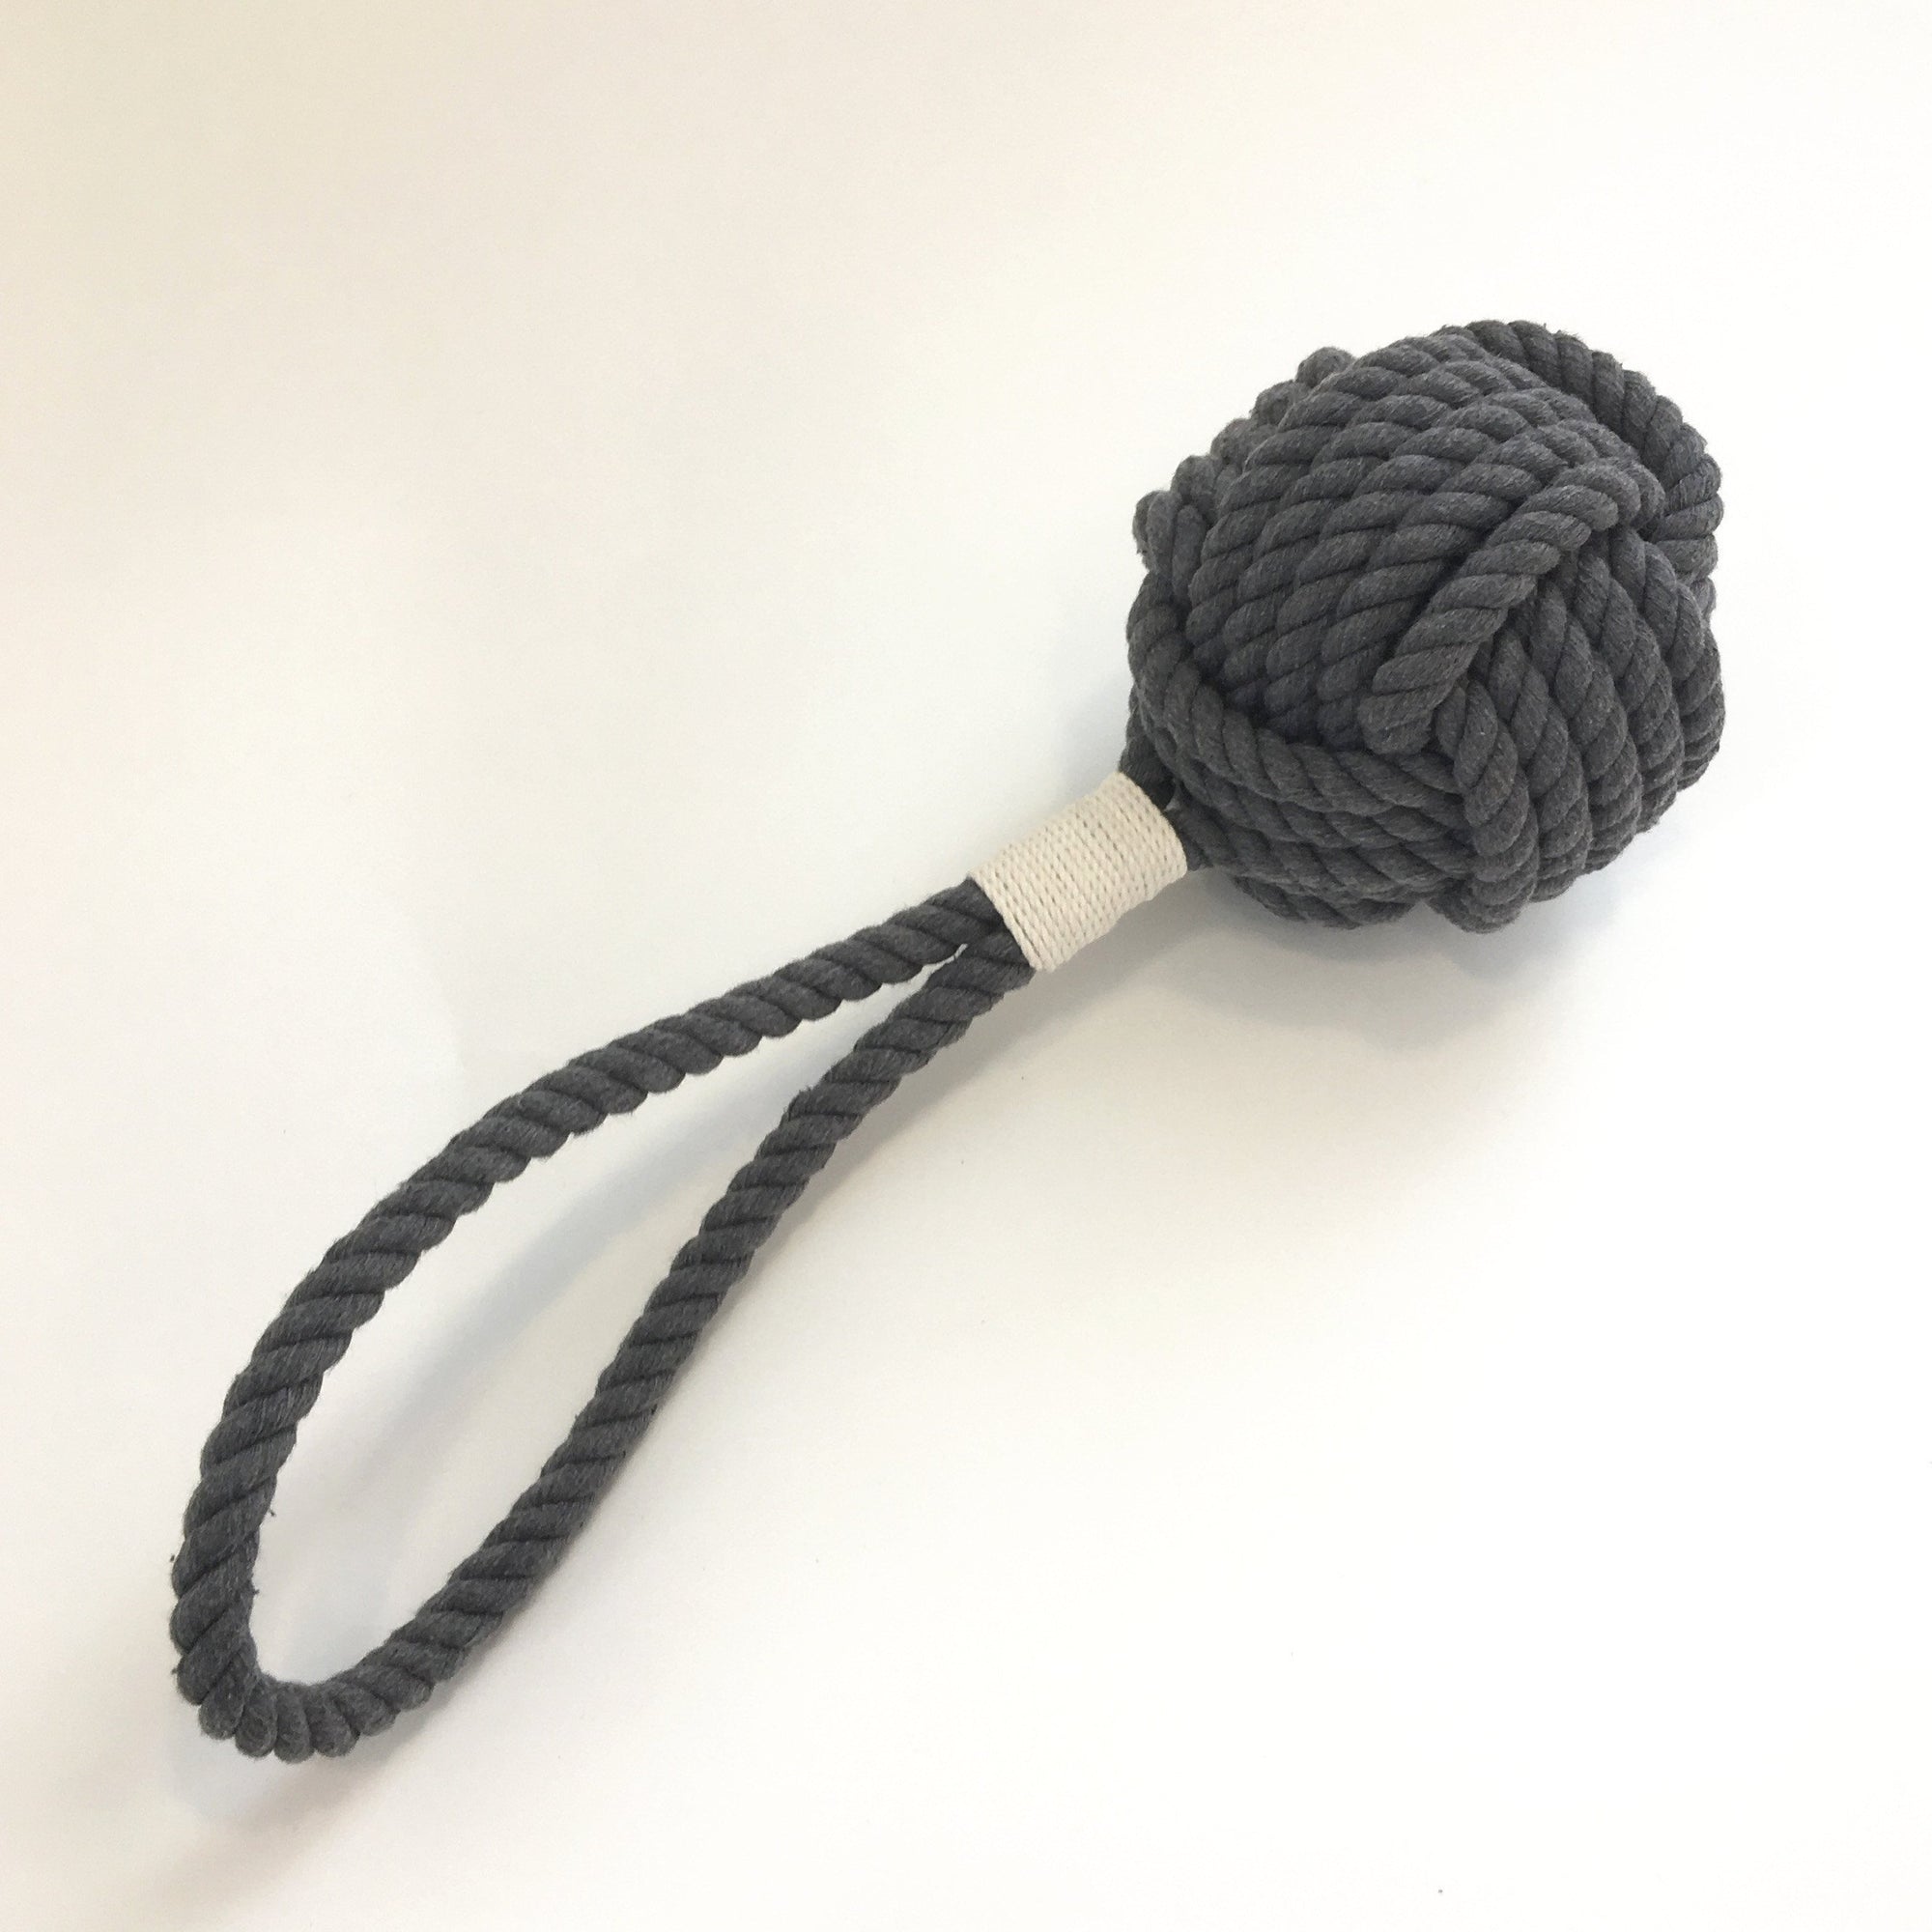 Nautical Knot Monkey Fist Rope Dog Toy - New Colors - Gray and Navy Blue handmade at Mystic Knotwork